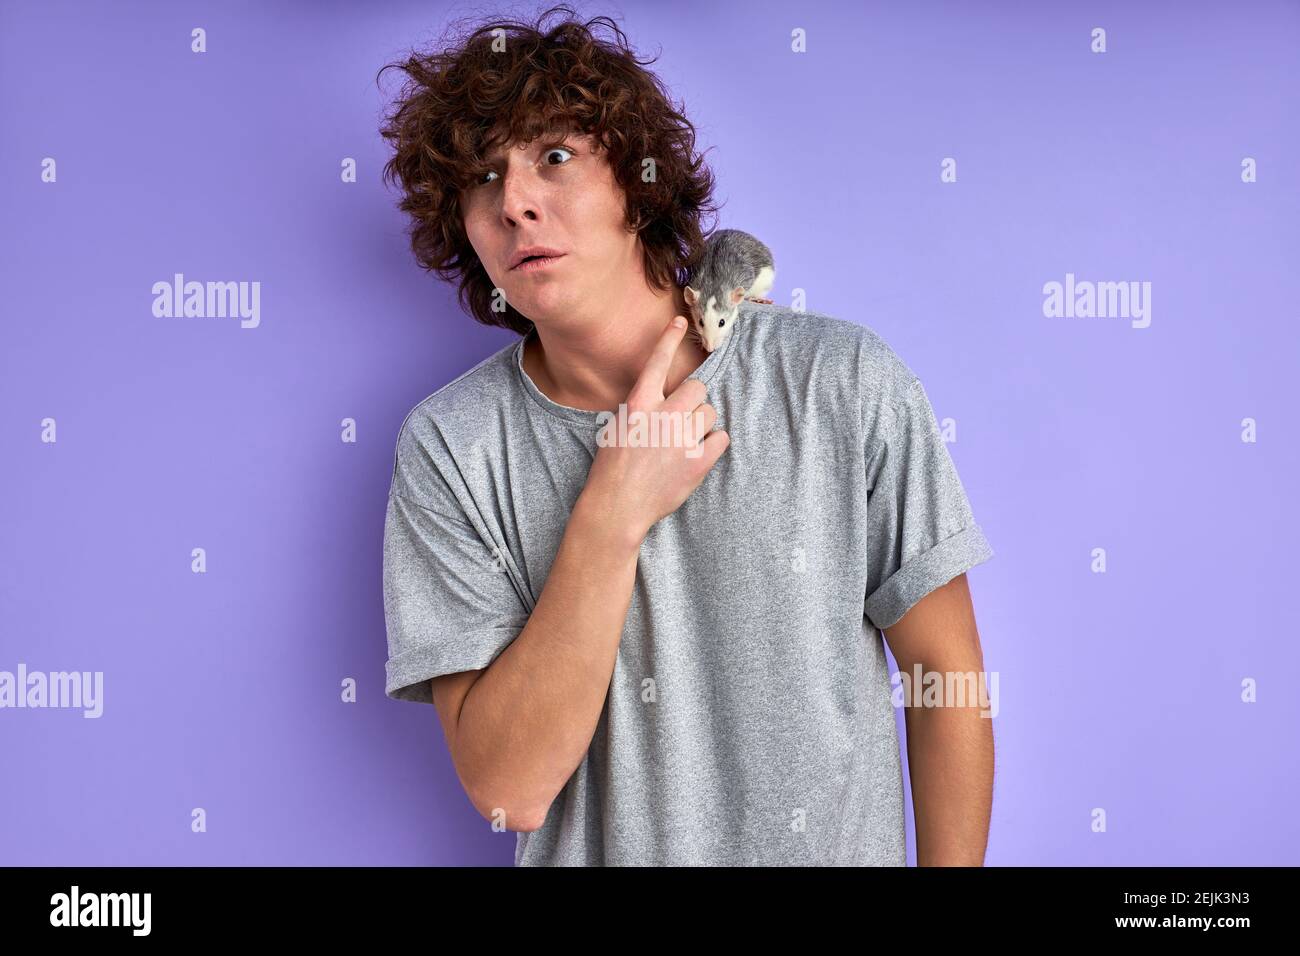 man does not know how to behave with a decorative rat, stand at a loss, afraid of rodents, isolated on purple background Stock Photo